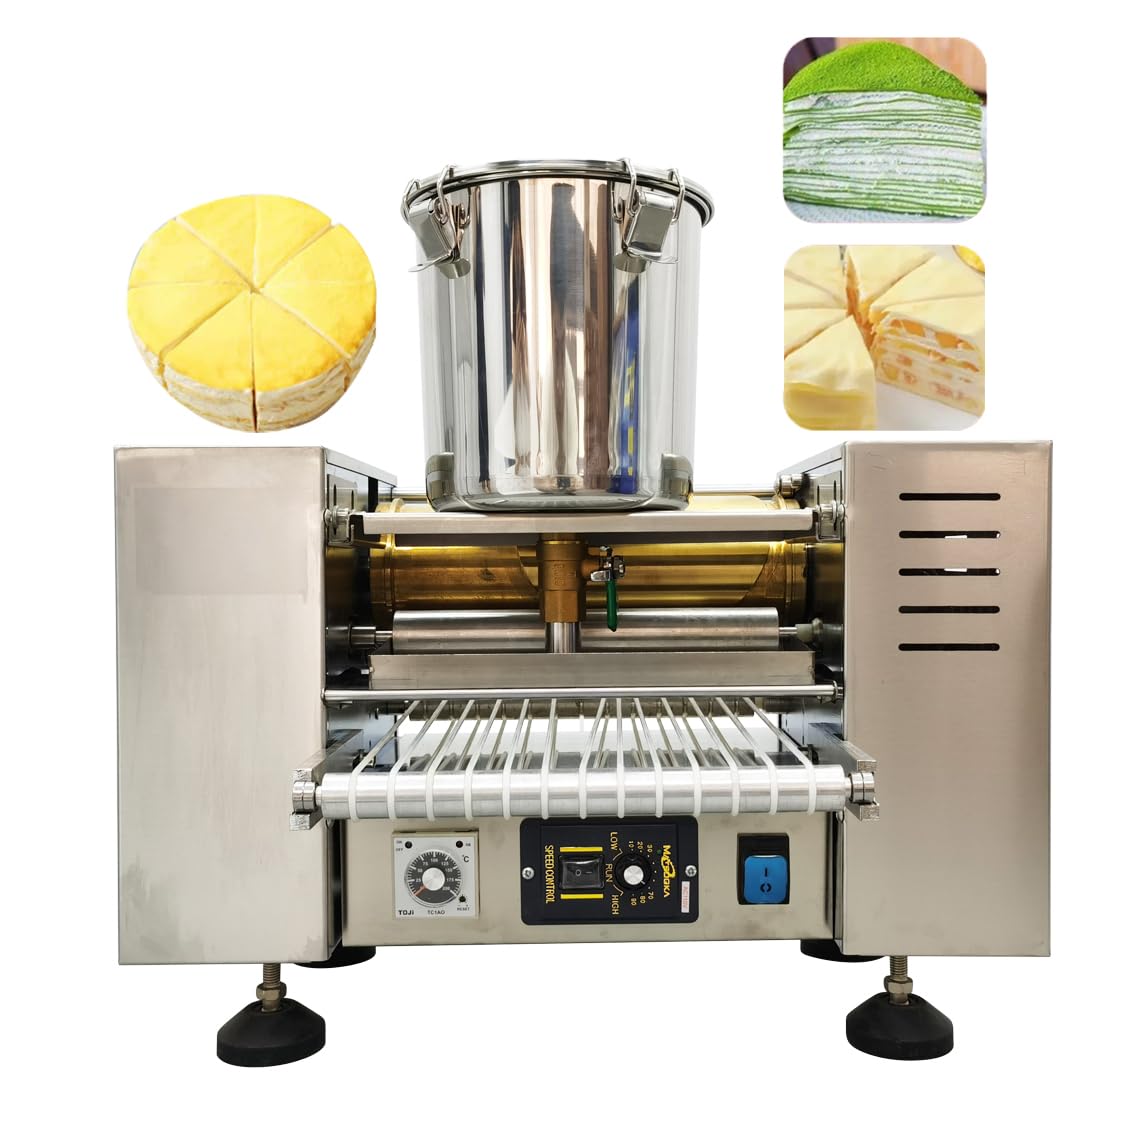 Pancake Wrapper Cake Machine Commercial Mille Crepe Cake Maker 6.3inch Layer Cake Making Machine Durian Mango Mille-feuille Maker 0.7mm-1.5mm Adjustable Thickness 110V 2.2KW - Cooked Tortilla Machine - 1